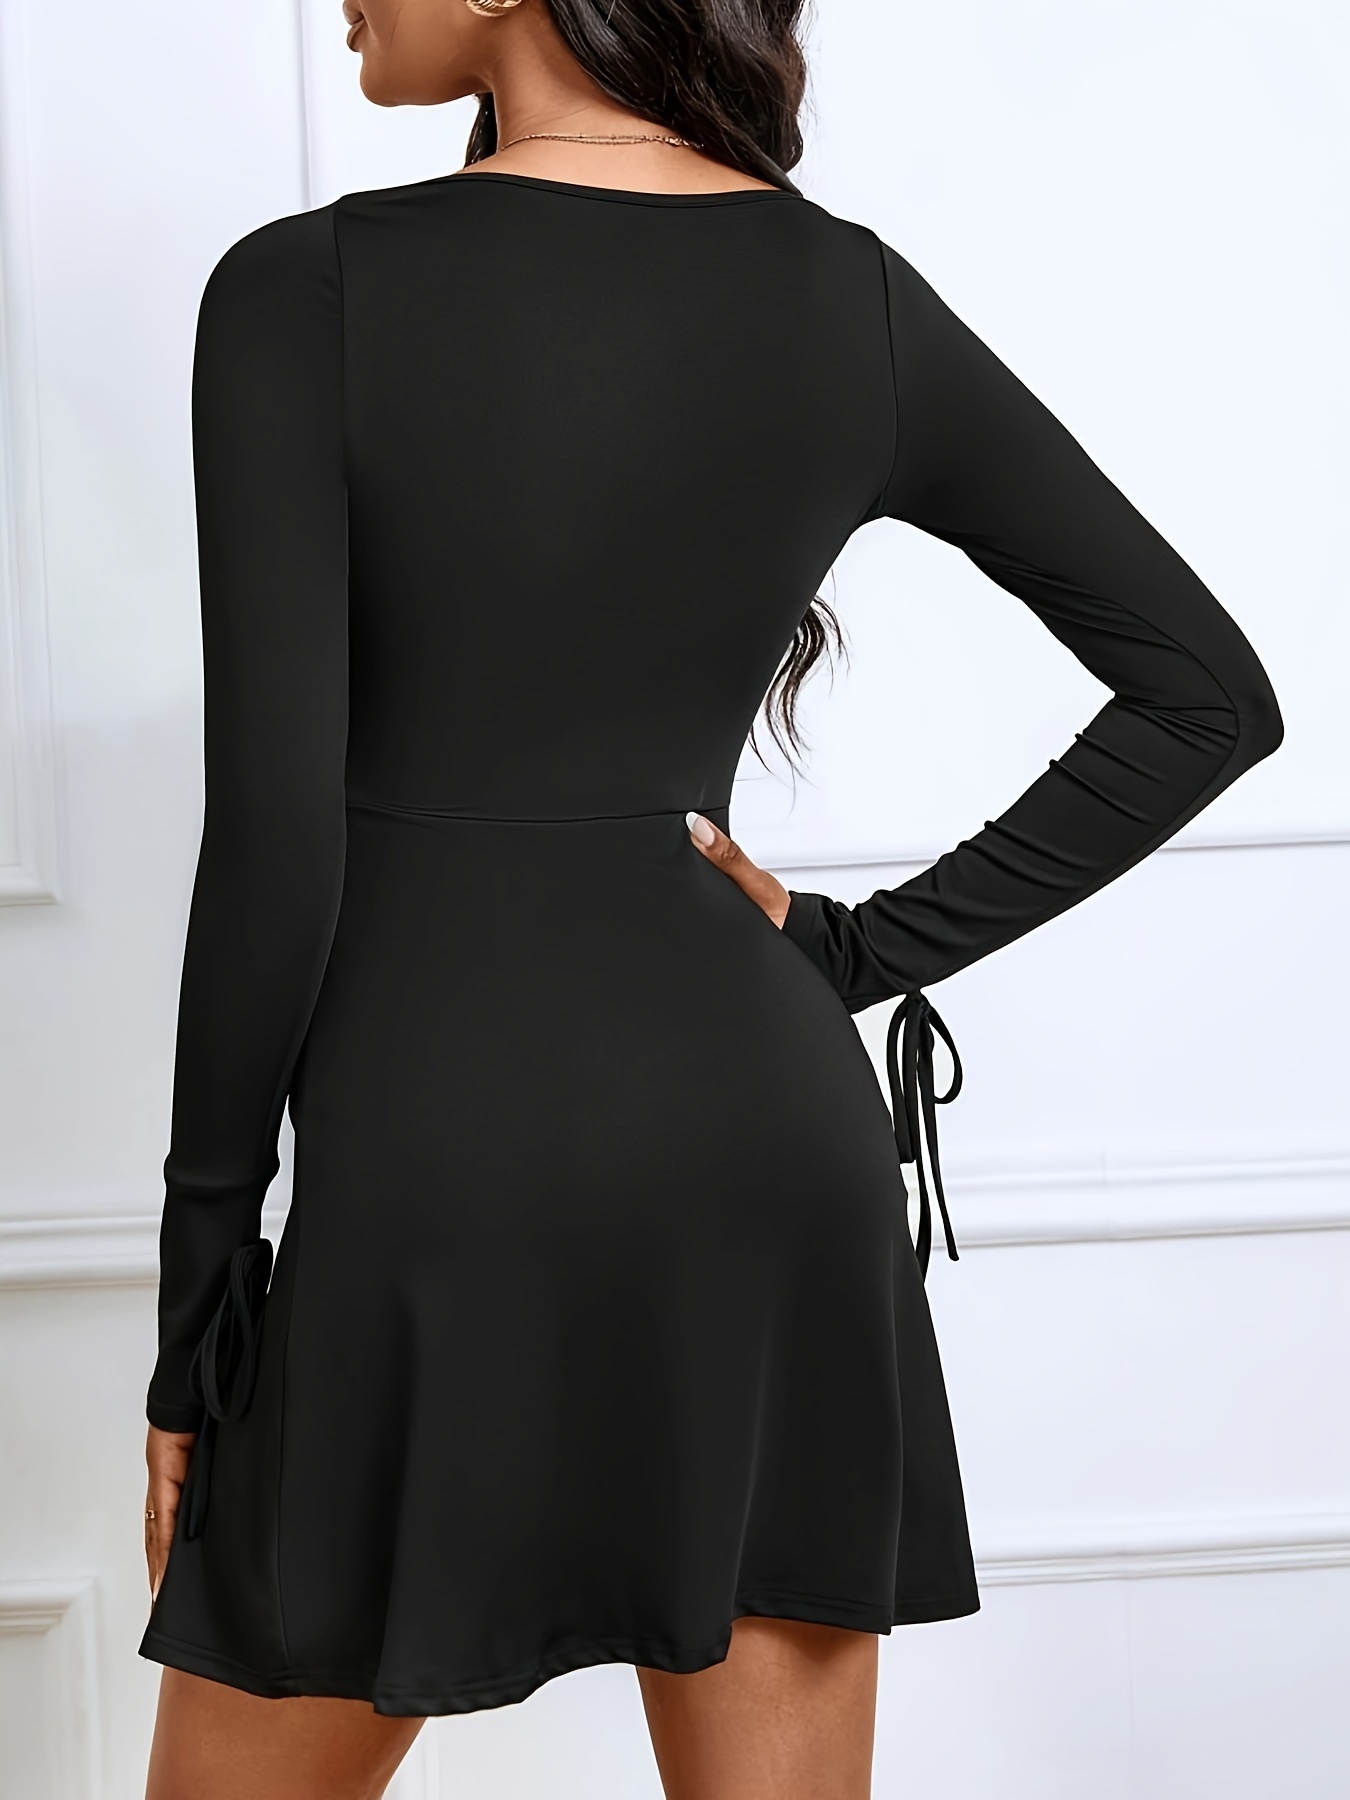 SASIMIC Women's Long Sleeve Bodycon Square Neck Sexy Party Long